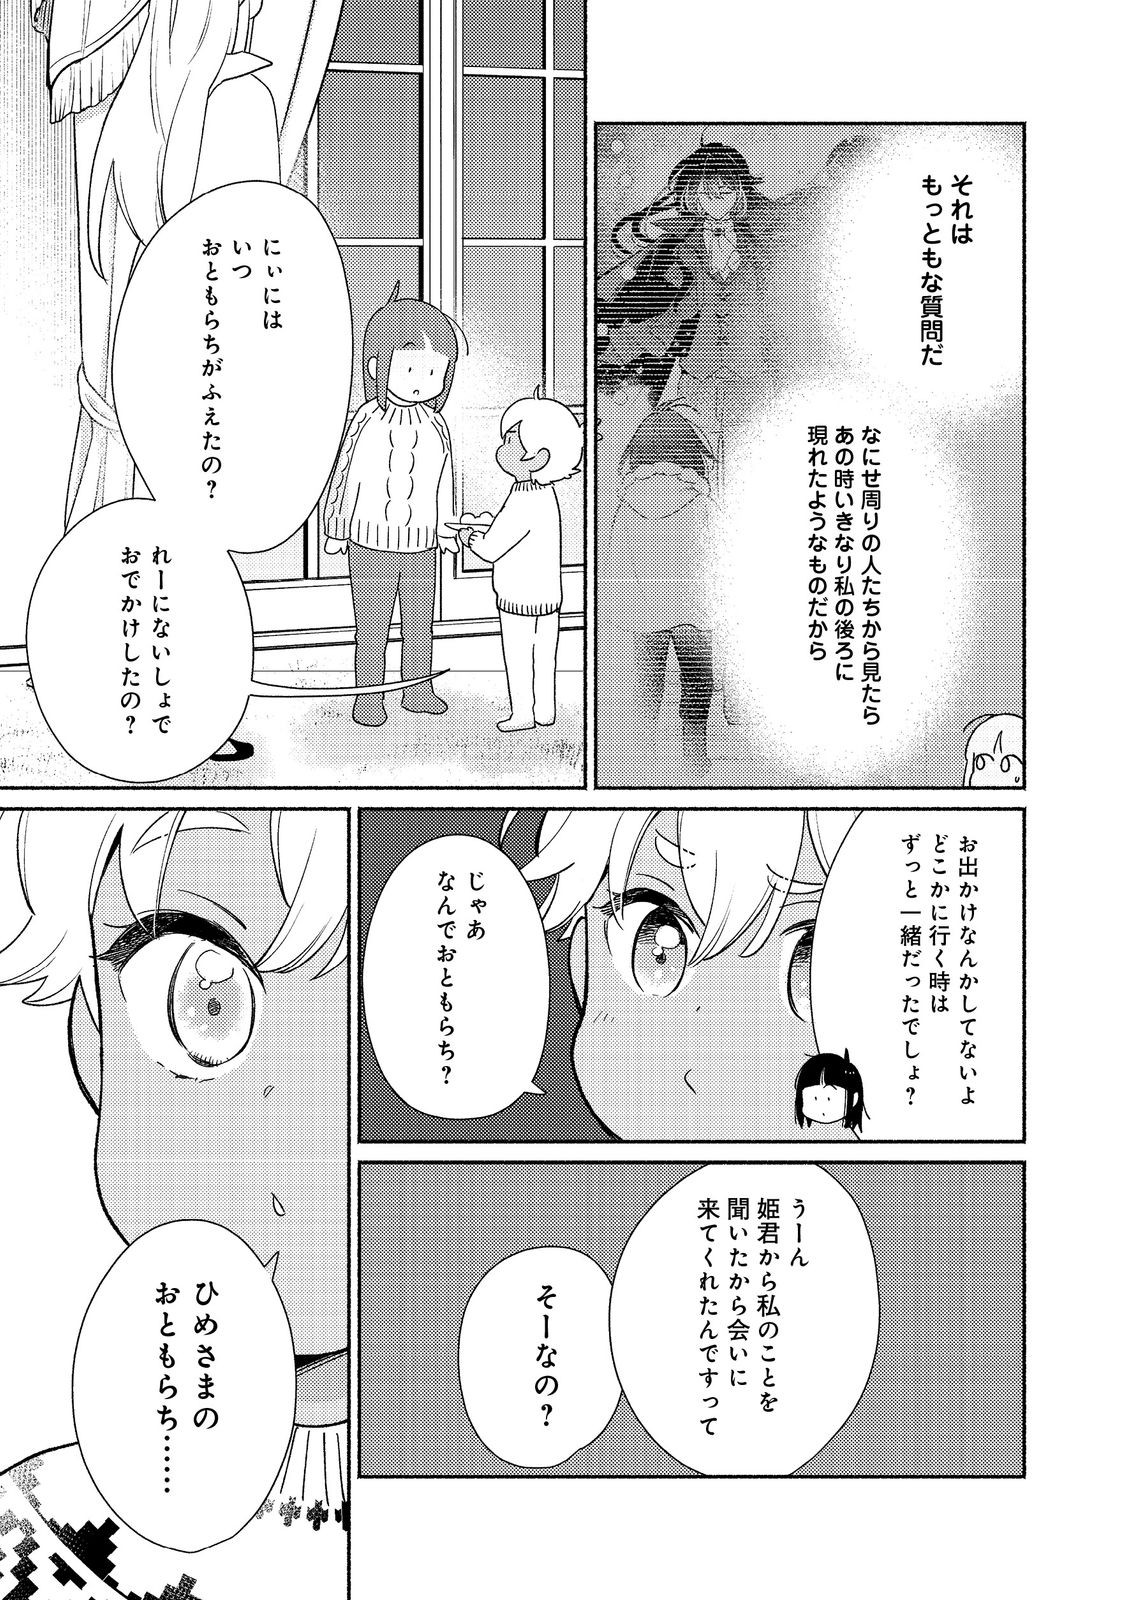 I’m the White Pig Nobleman 第26.2話 - Page 6